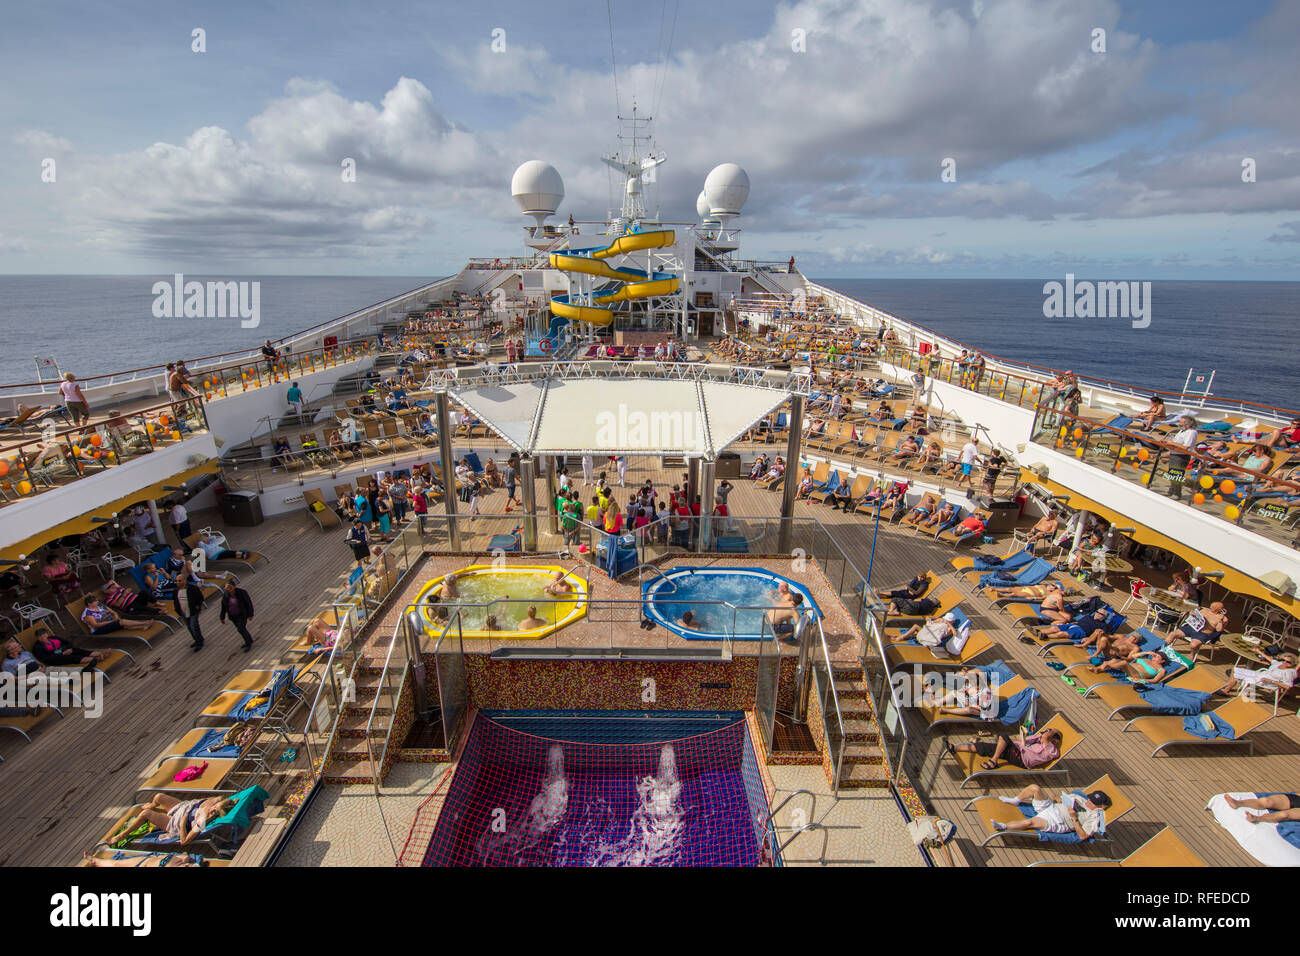 France, Fort-de-France, Life on board of cruise ship Costa Magica. Stock Photo